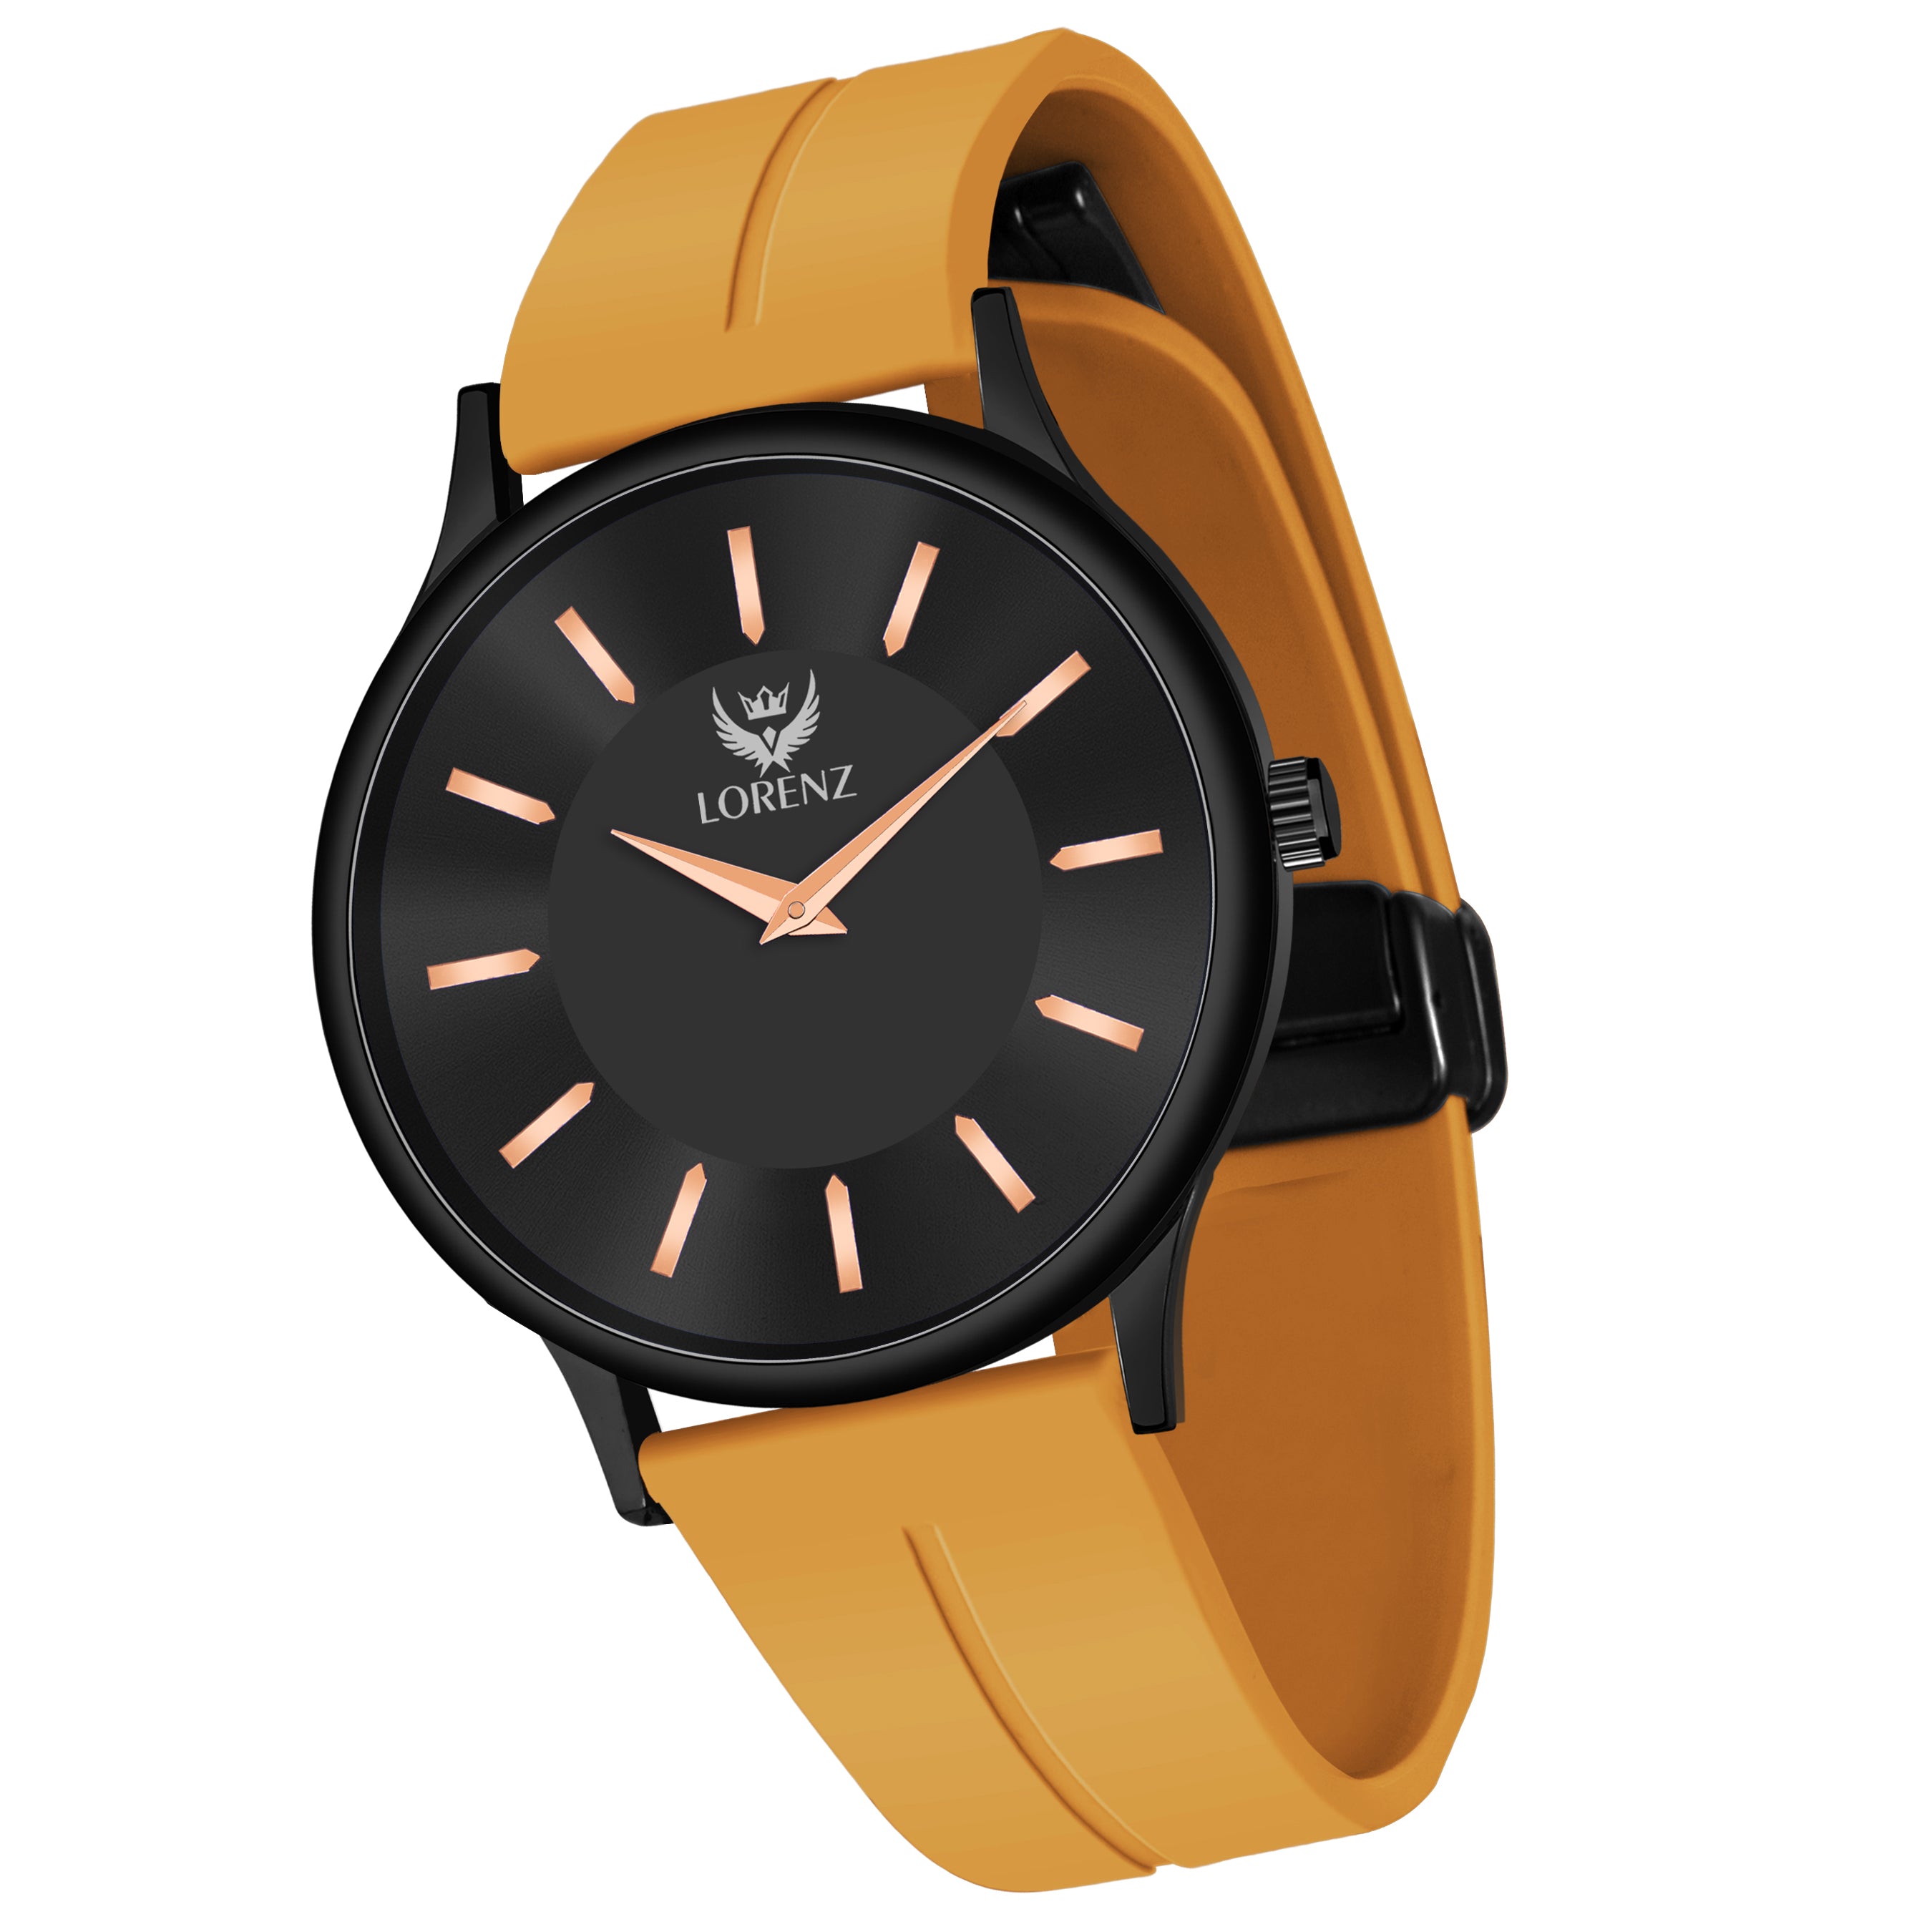 Lorenz Black Dial Men's Watch with Yellow Magnetic Strap